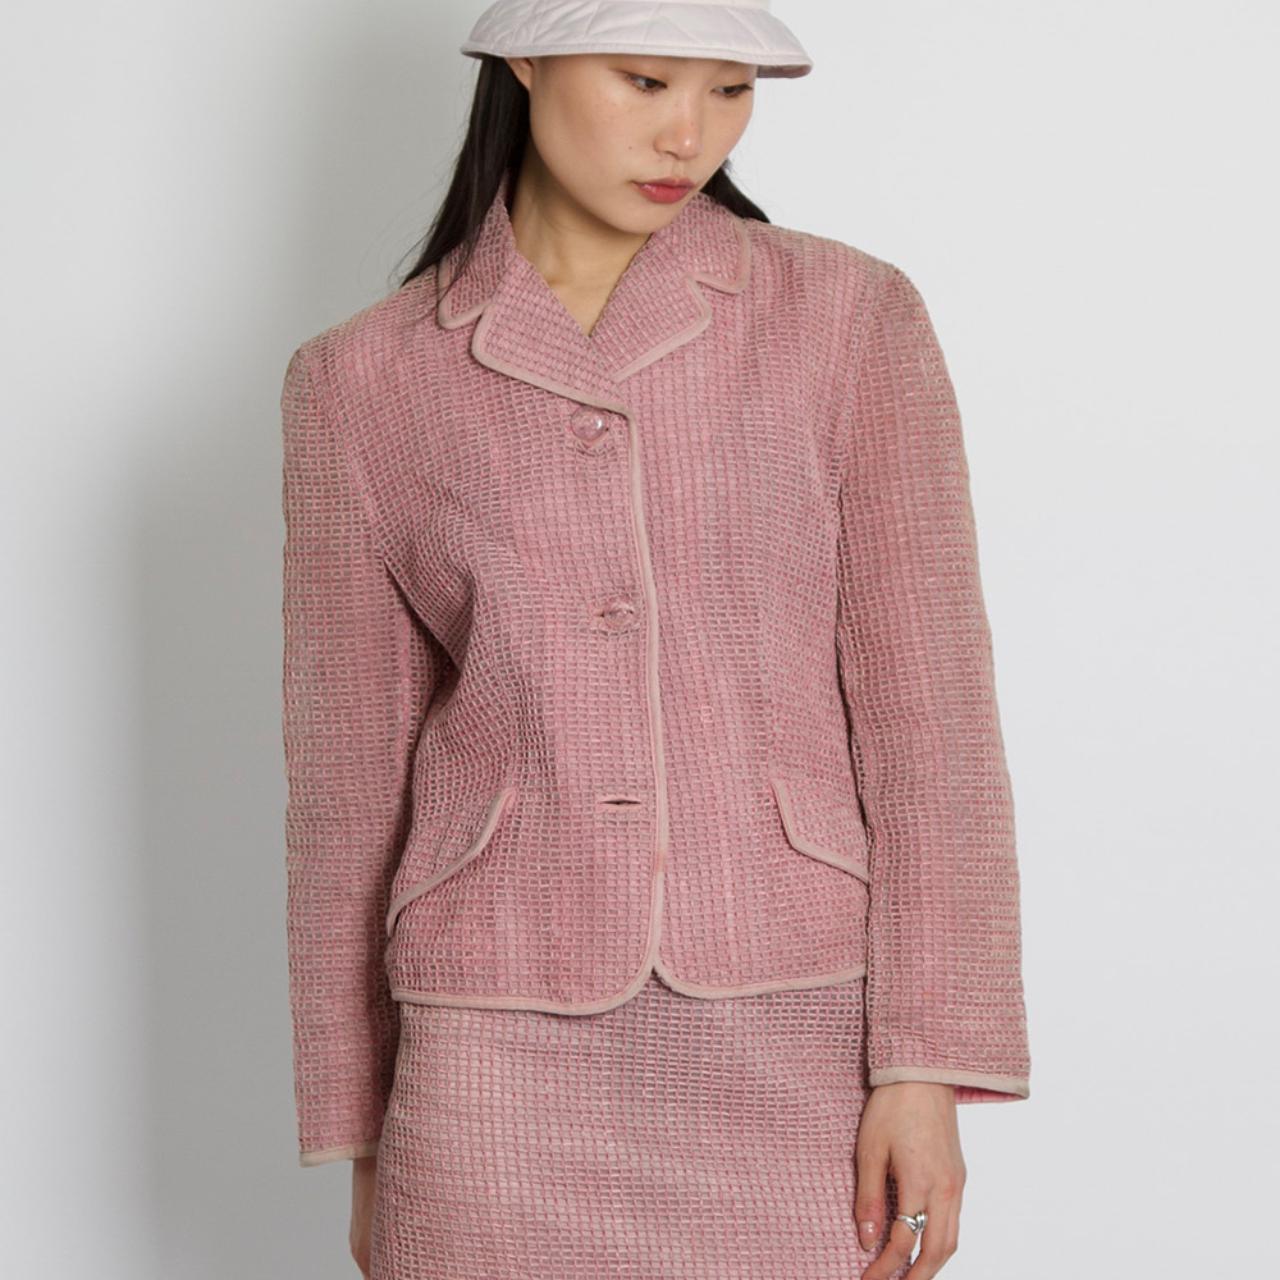 Gianni Versace Suit 

Pink Jacket Skirt Set 1990's

2 Piece - Jacket and Skirt co-ord.

Waffle Suede Detail. Medusa Clear Buttons. Very Rare Piece.

CONDITION: This item is a vintage/pre-worn piece so some signs of natural wear and age are to be